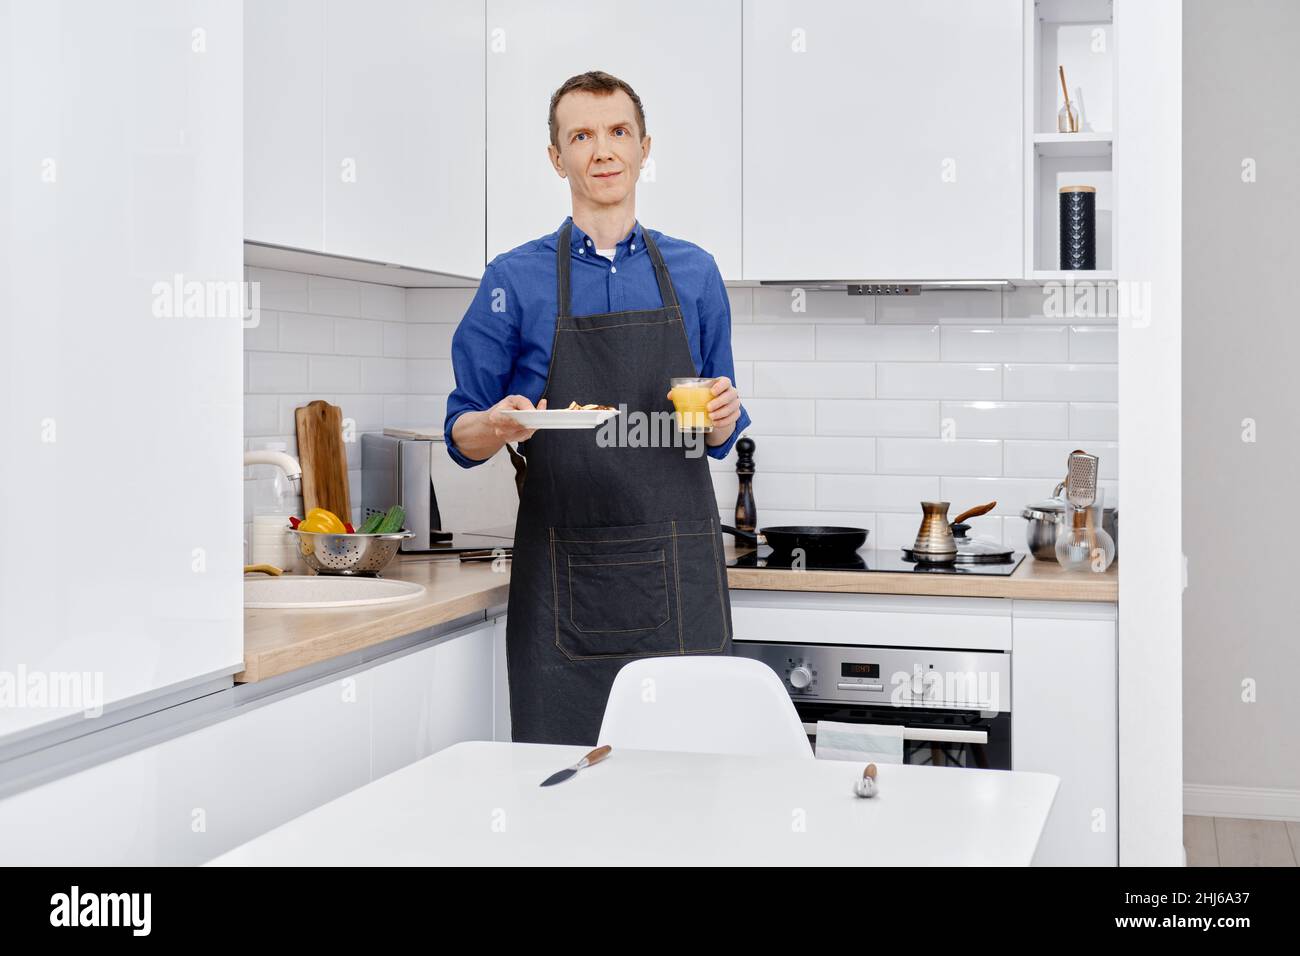 Middle age man brings plate with healthy food to the kitchen table Stock Photo